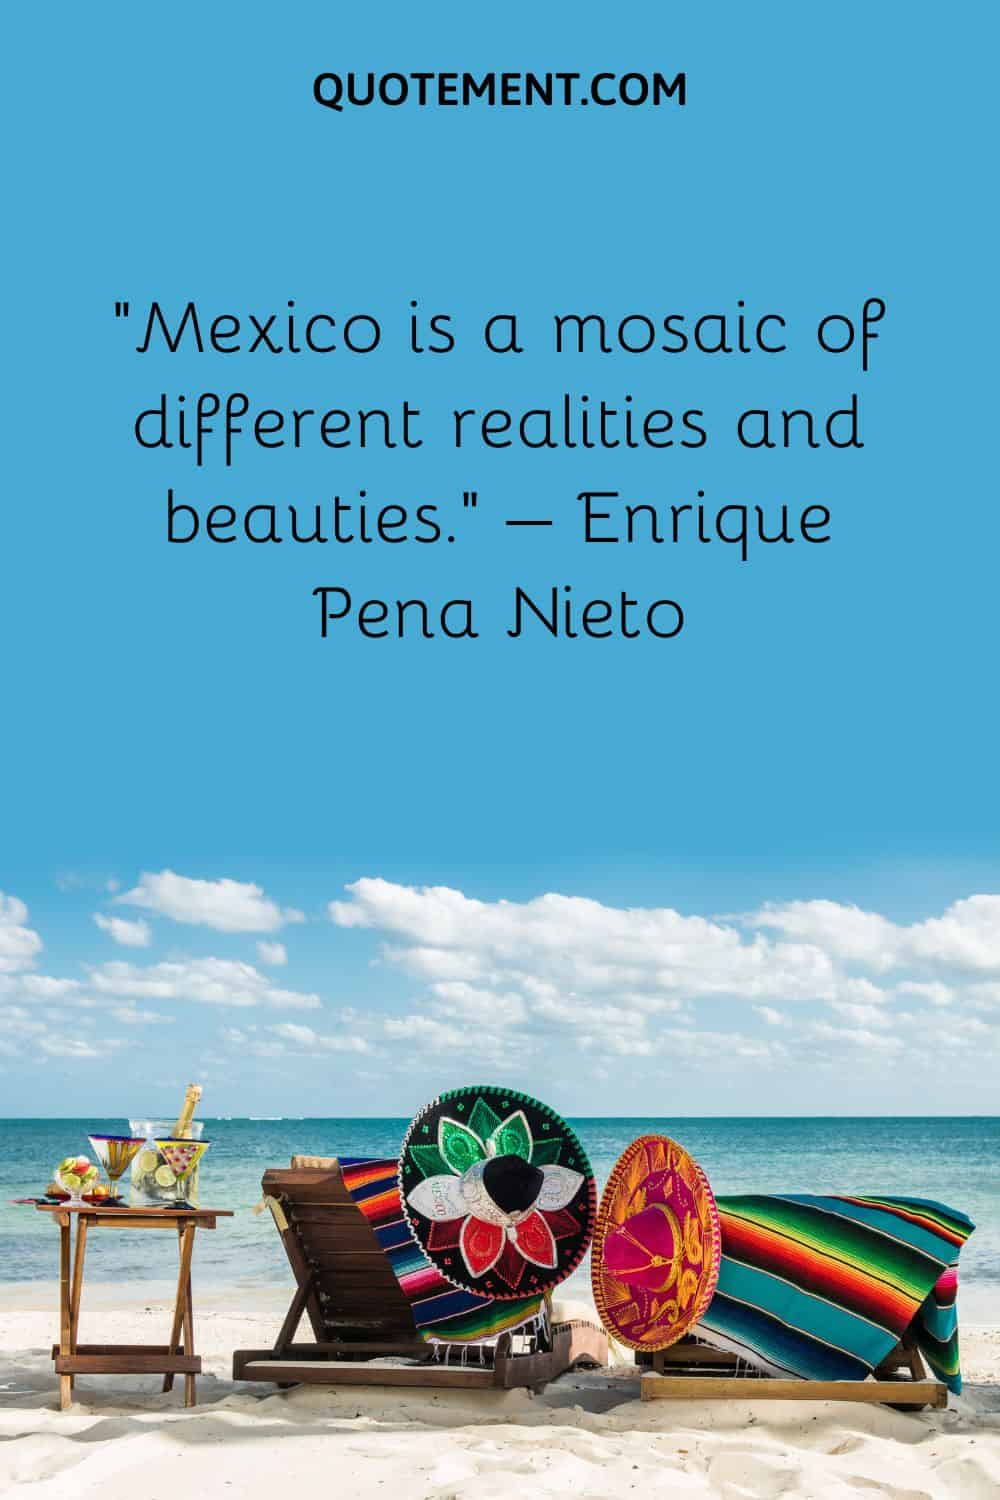 Mexico is a mosaic of different realities and beauties